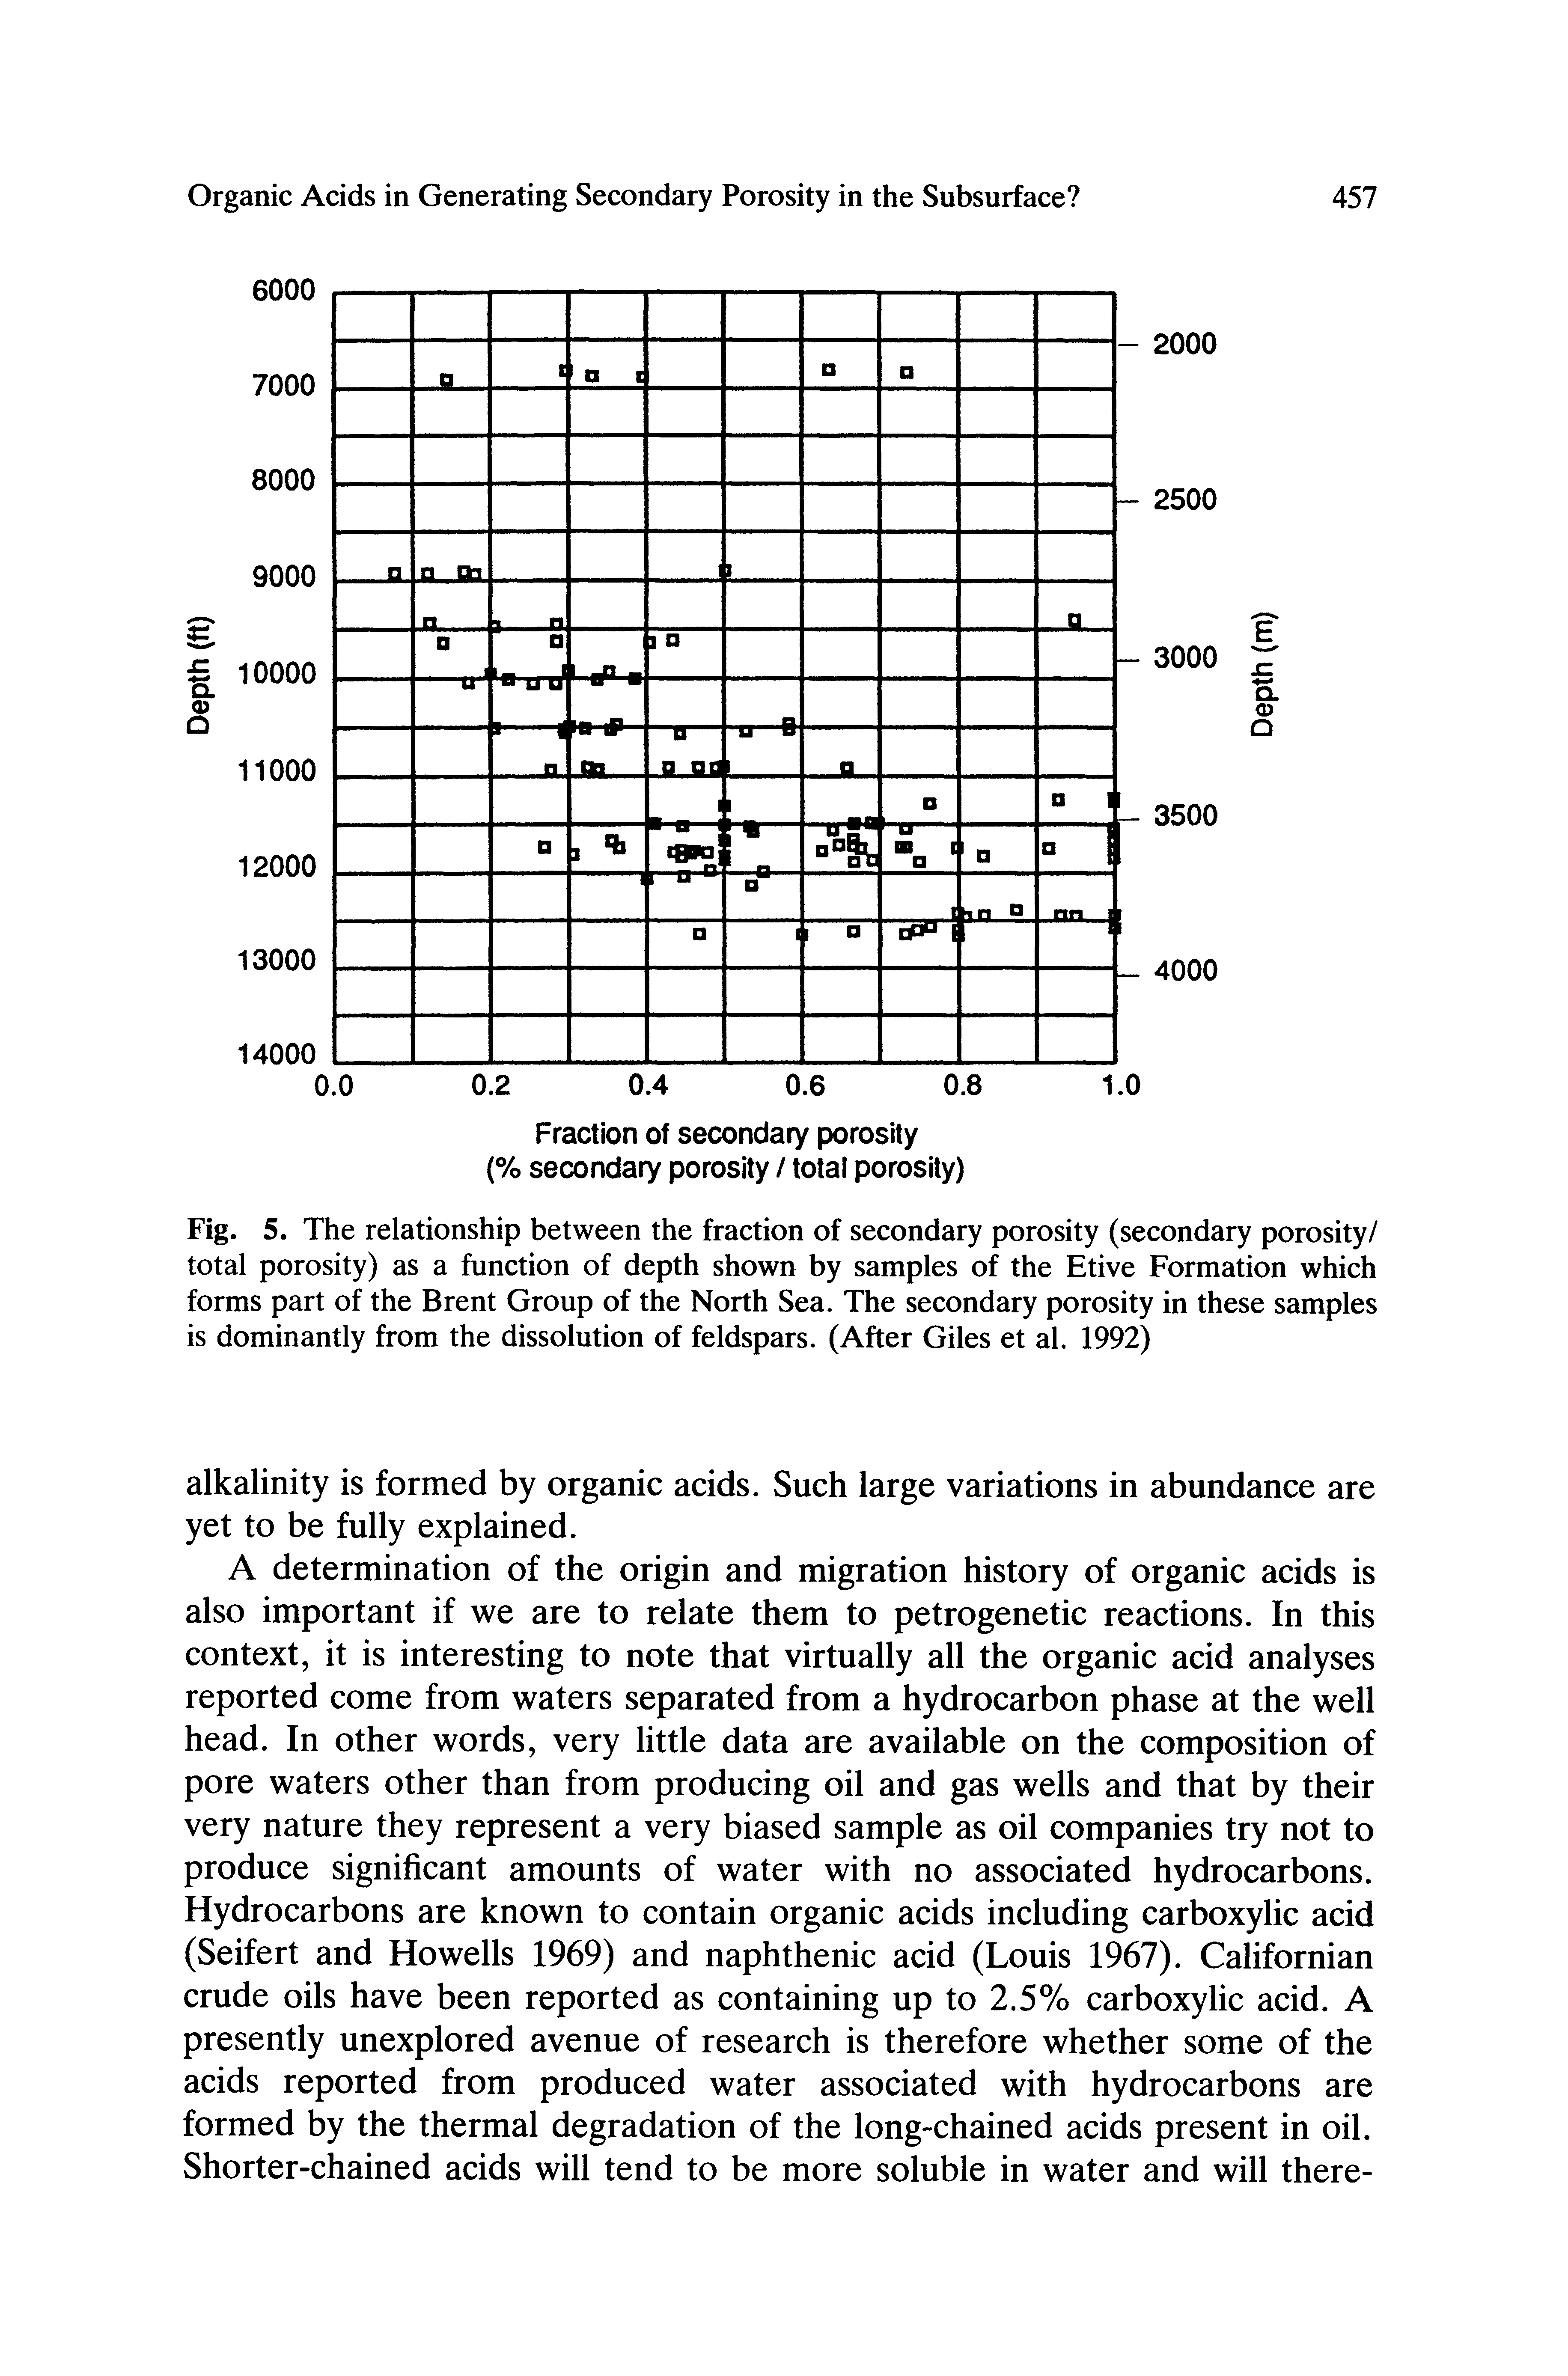 Fig. 5. The relationship between the fraction of secondary porosity (secondary porosity/ total porosity) as a function of depth shown by samples of the Etive Formation which forms part of the Brent Group of the North Sea. The secondary porosity in these samples is dominantly from the dissolution of feldspars. (After Giles et al. 1992)...